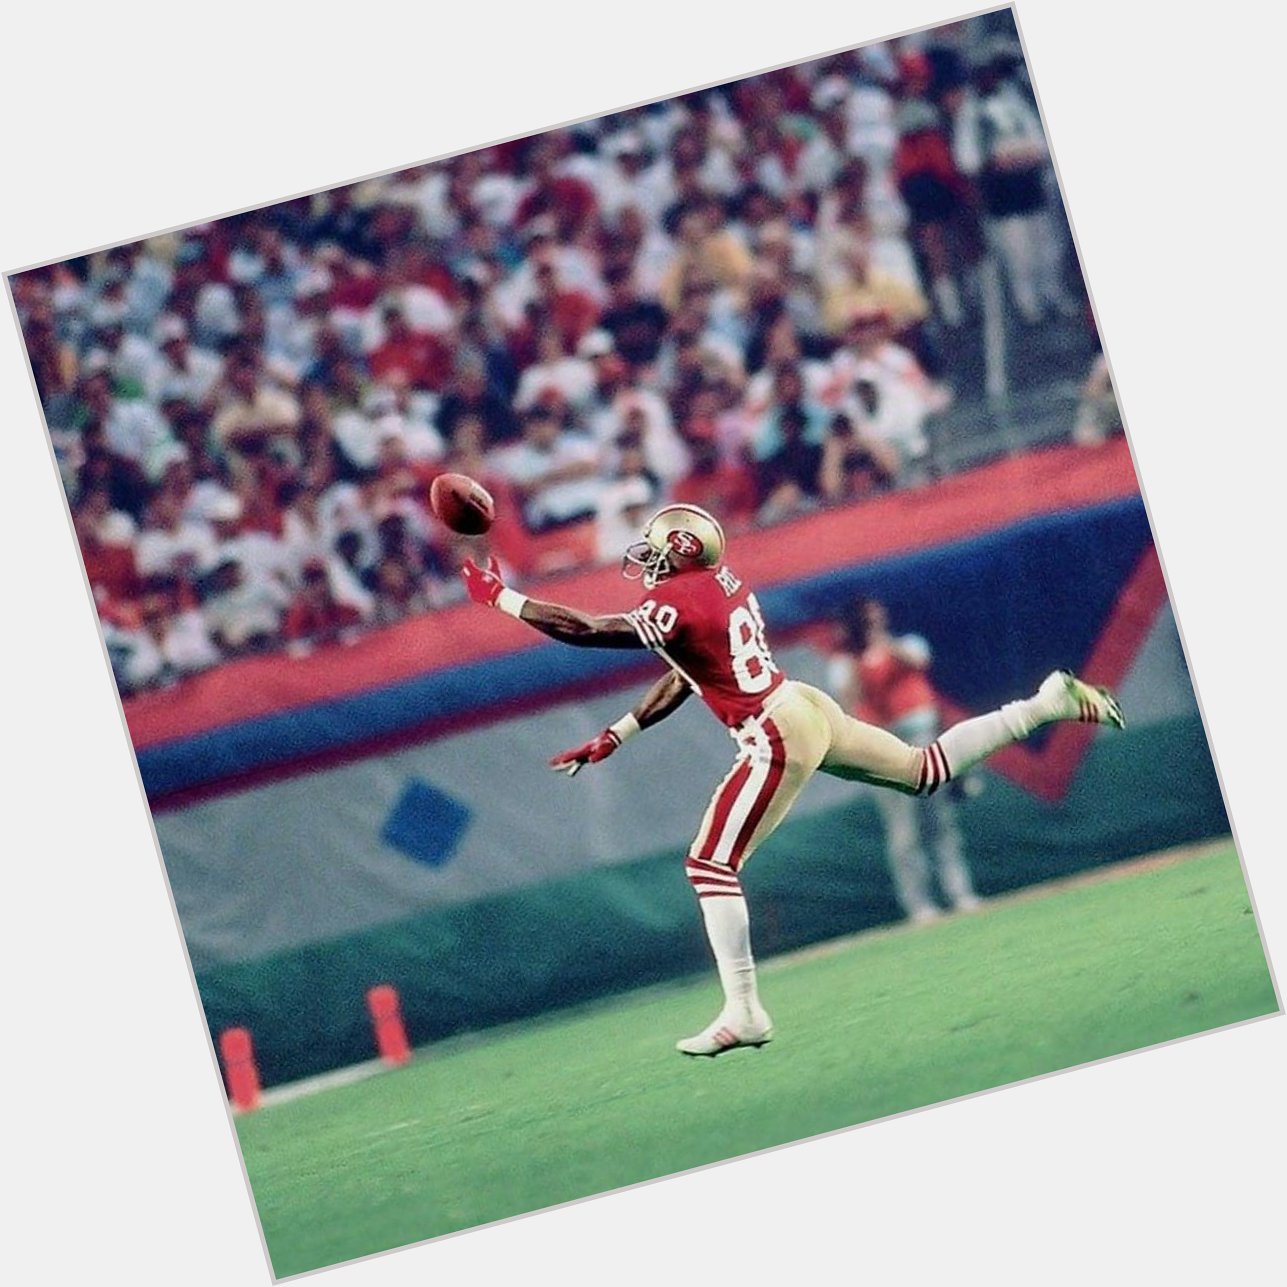 Happy birthday to the G.O.A.T wideout Jerry Rice!  